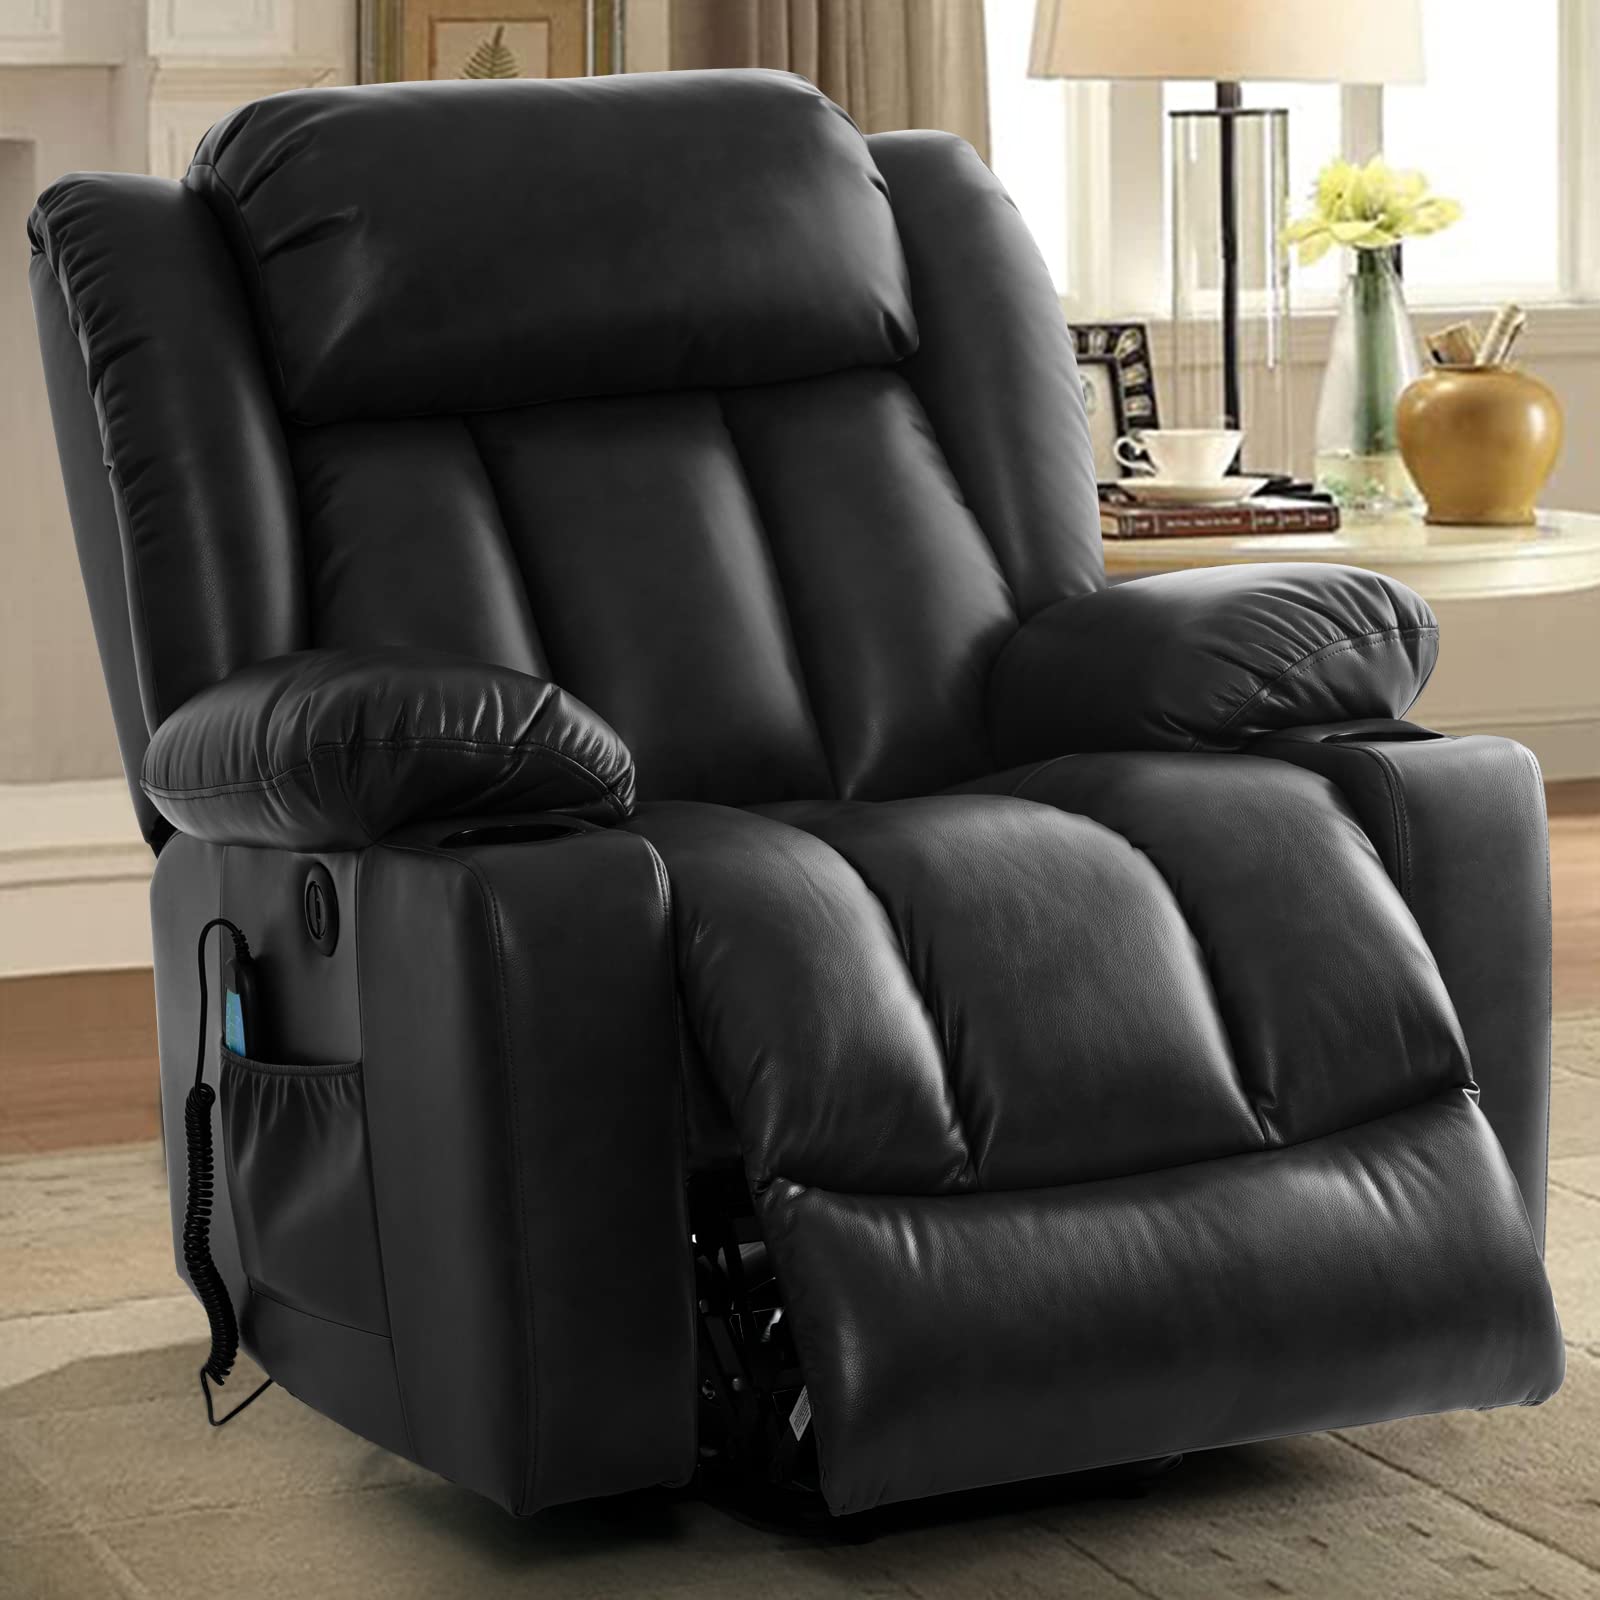 Large Lift Chair Recliners For Elderly with Heat and Massage